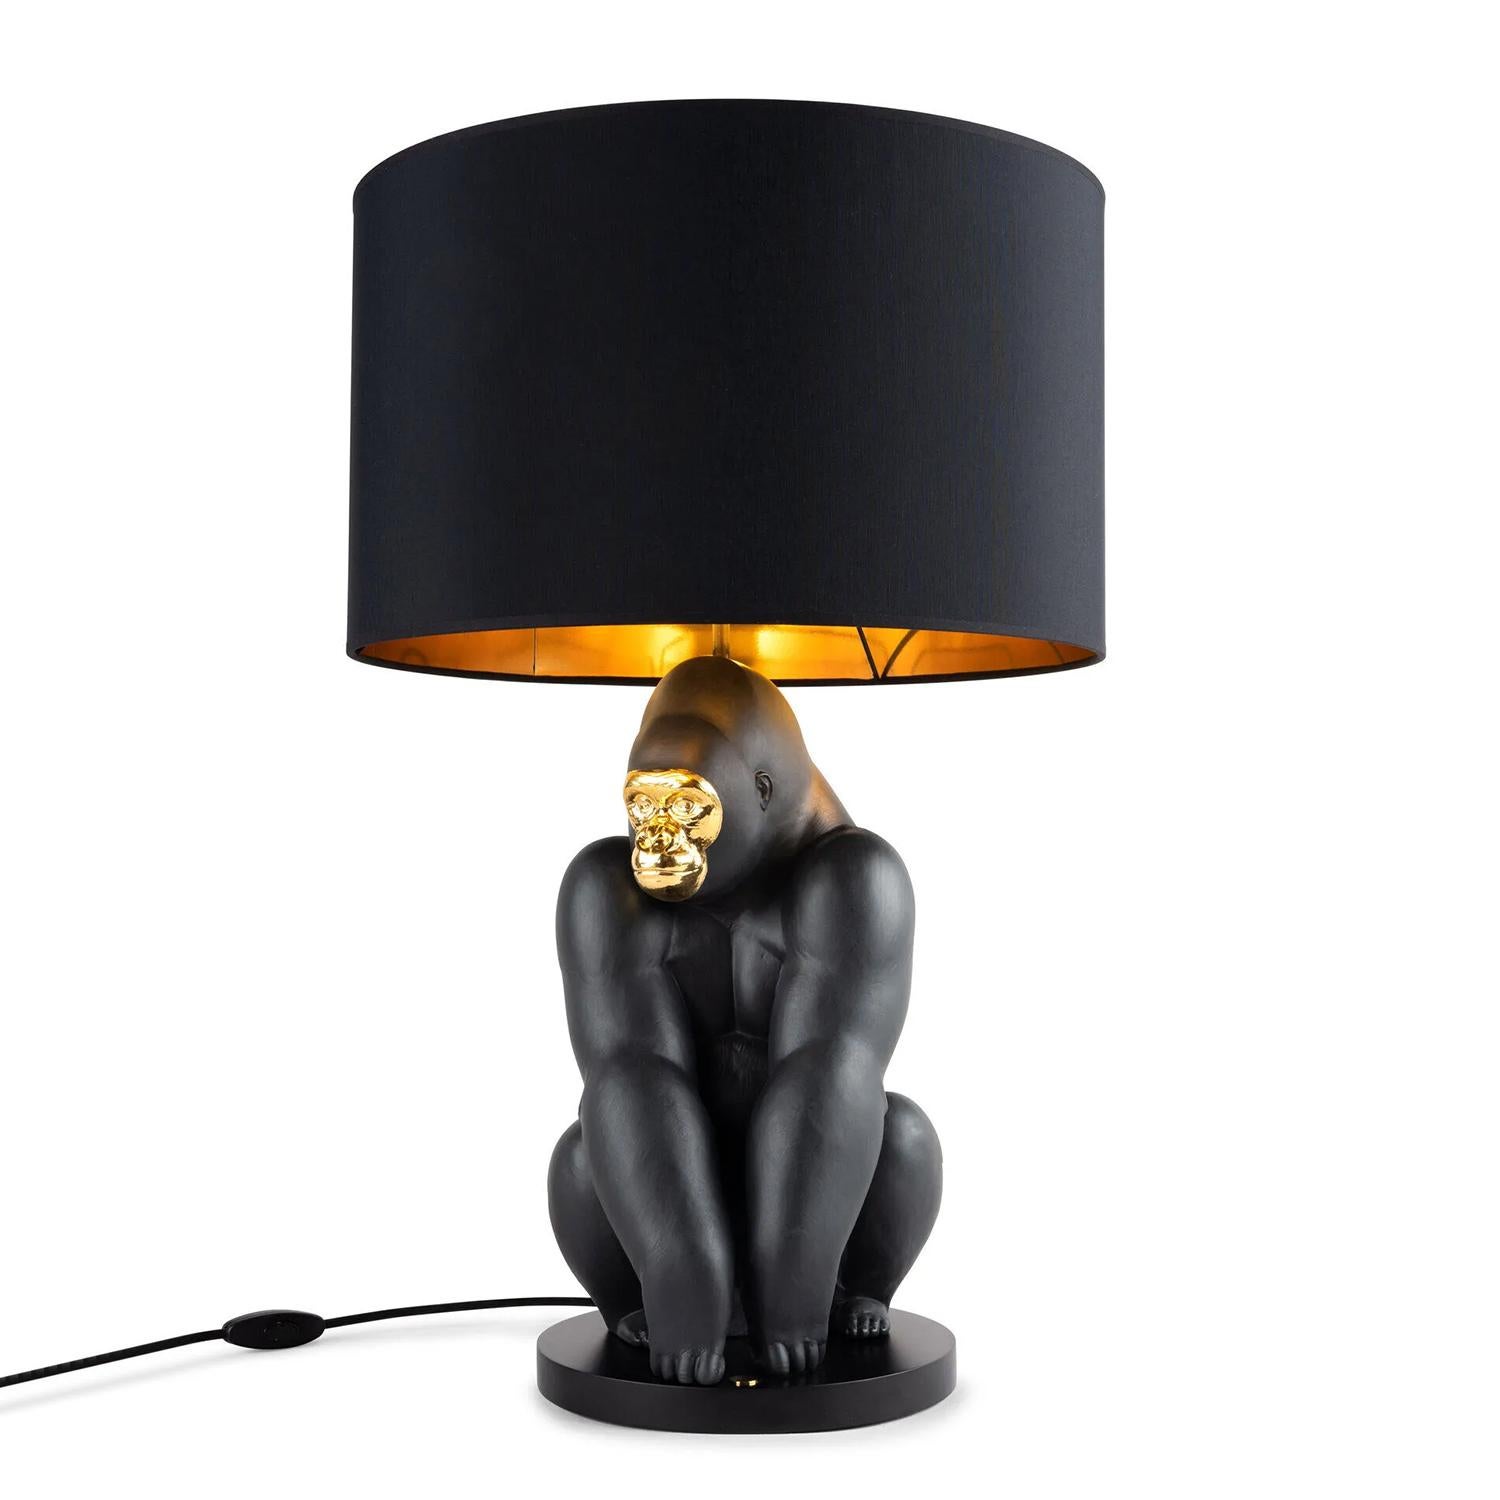 Table Lamp Kong Seat with all structure in 
porcelain in black matte and shiny gold finish.
1 bulb, lamp holder type E27, max 40 Watt.
Bulb not included. Including a black lampshade
in gold finish inside.